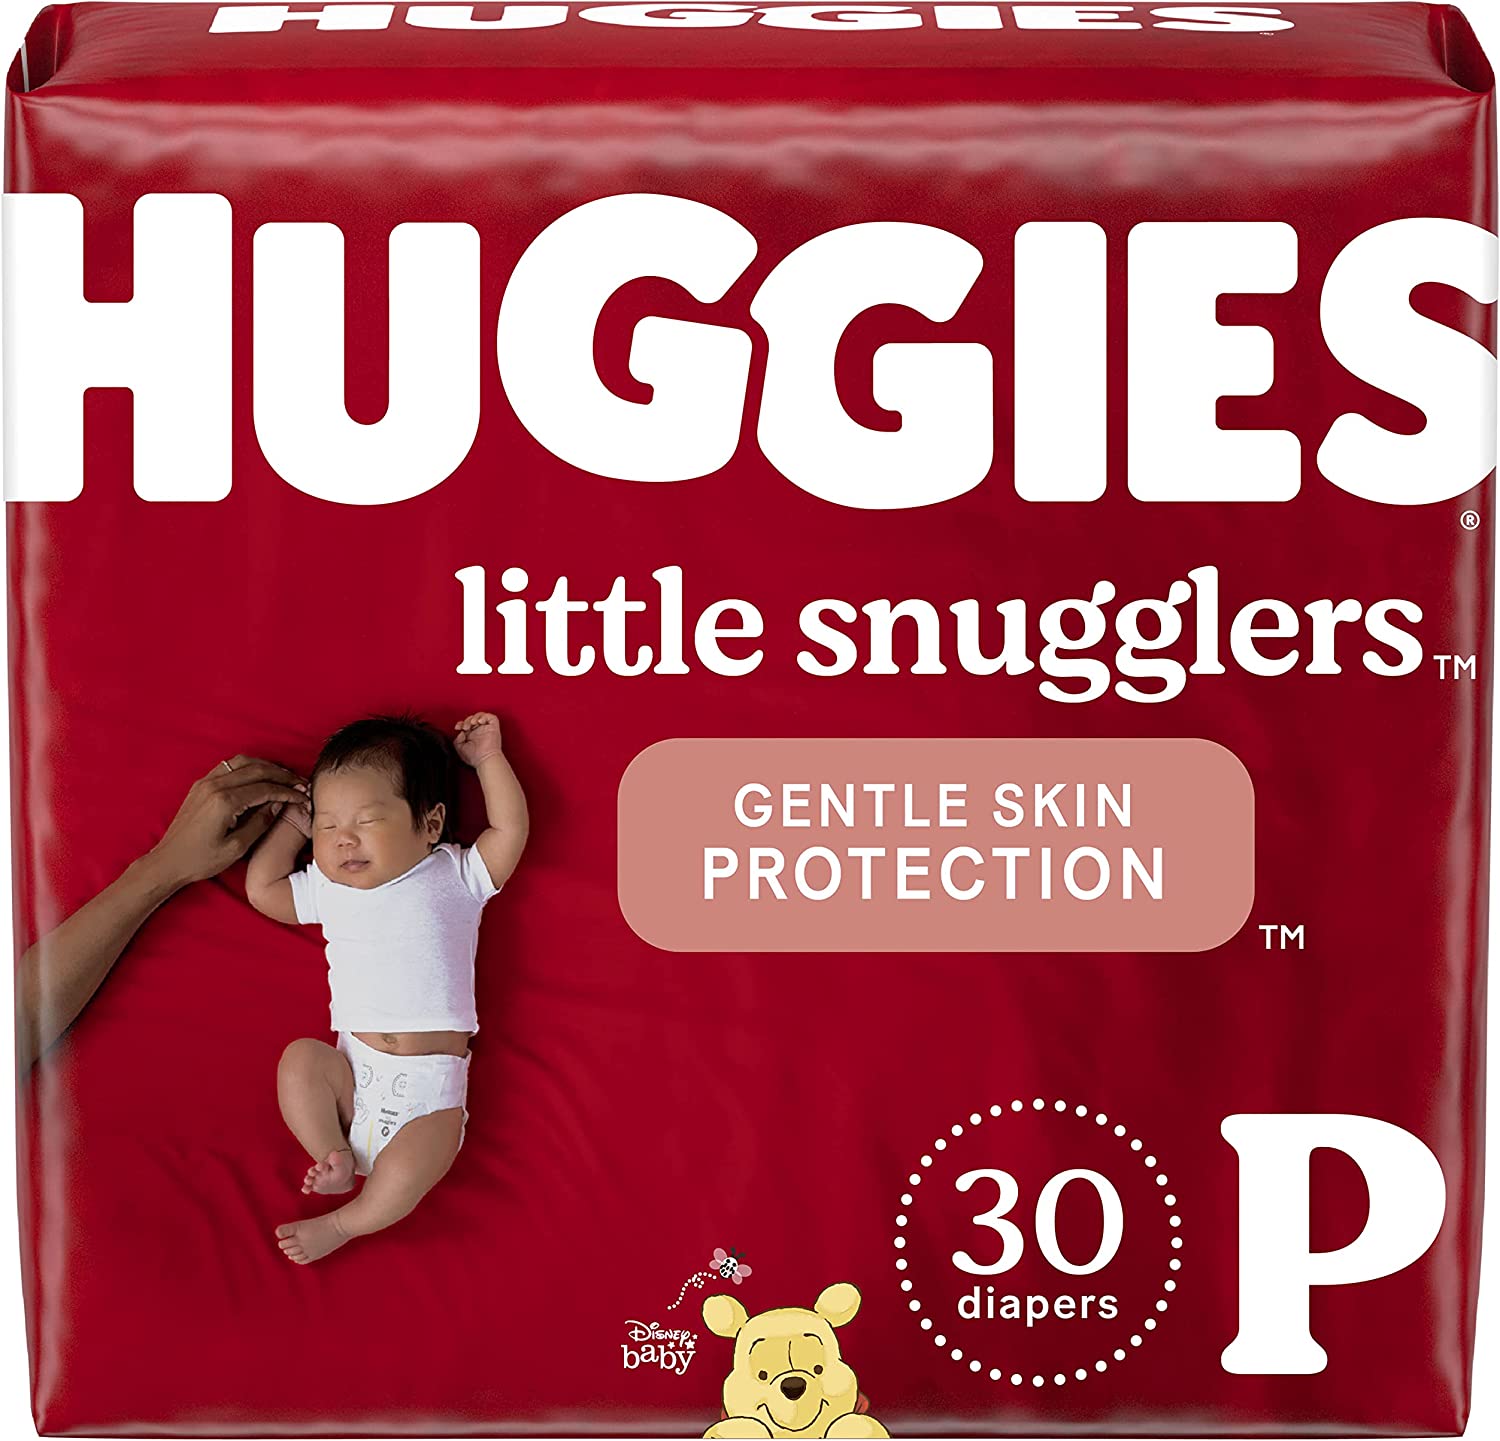 HUGGIES Little Snugglers Baby Diapers, Size Preemie, 30 Count, Convenience Pack (Packaging May Vary)